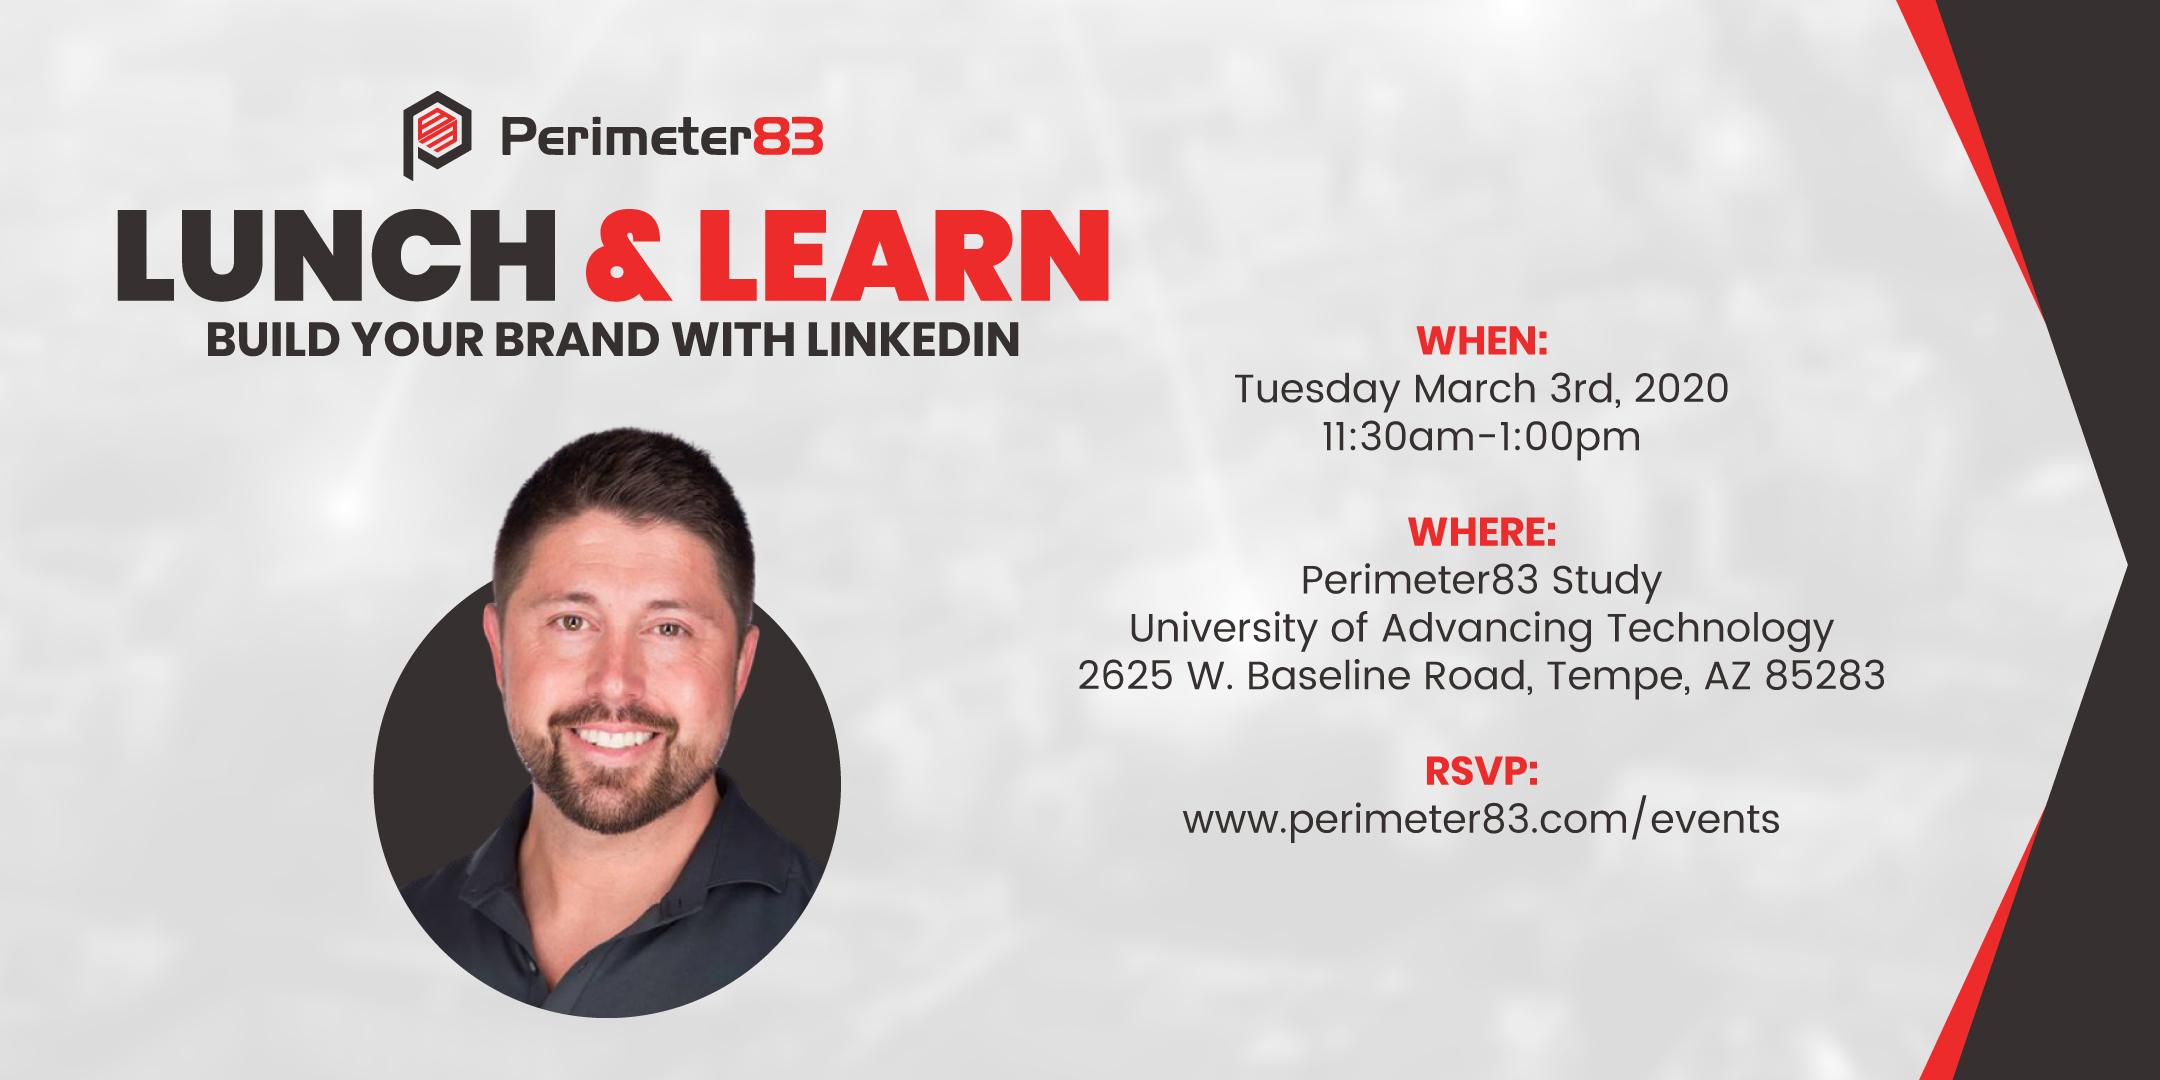 Perimeter83 Lunch & Learn - Build Your Brand with LinkedIn